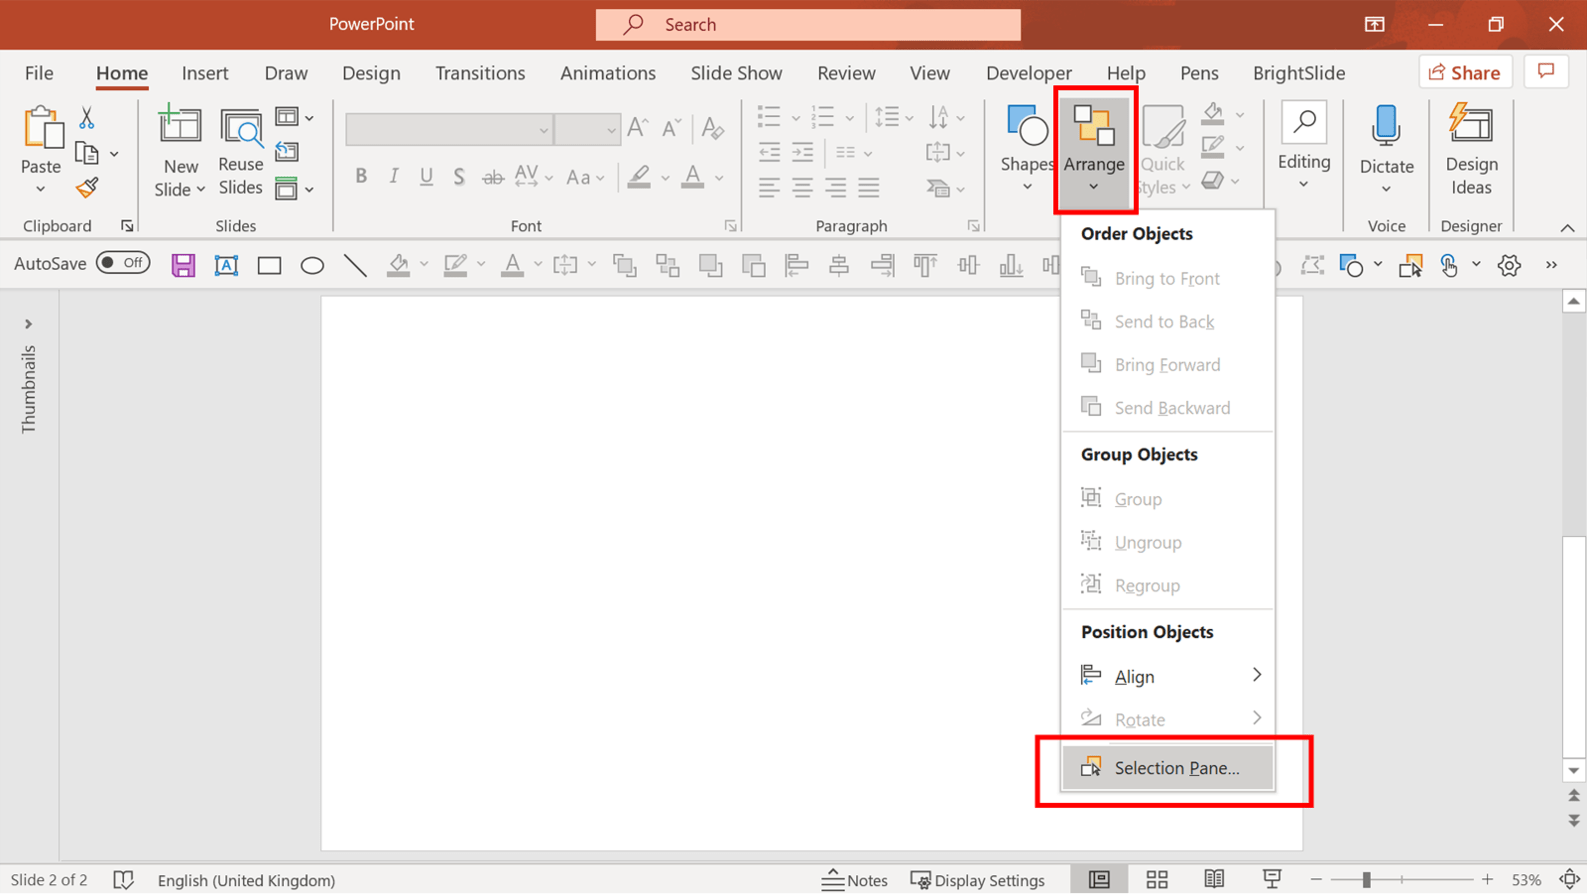 Screenshot of PowerPoint showing how to access the Selection Pane from the ribbon